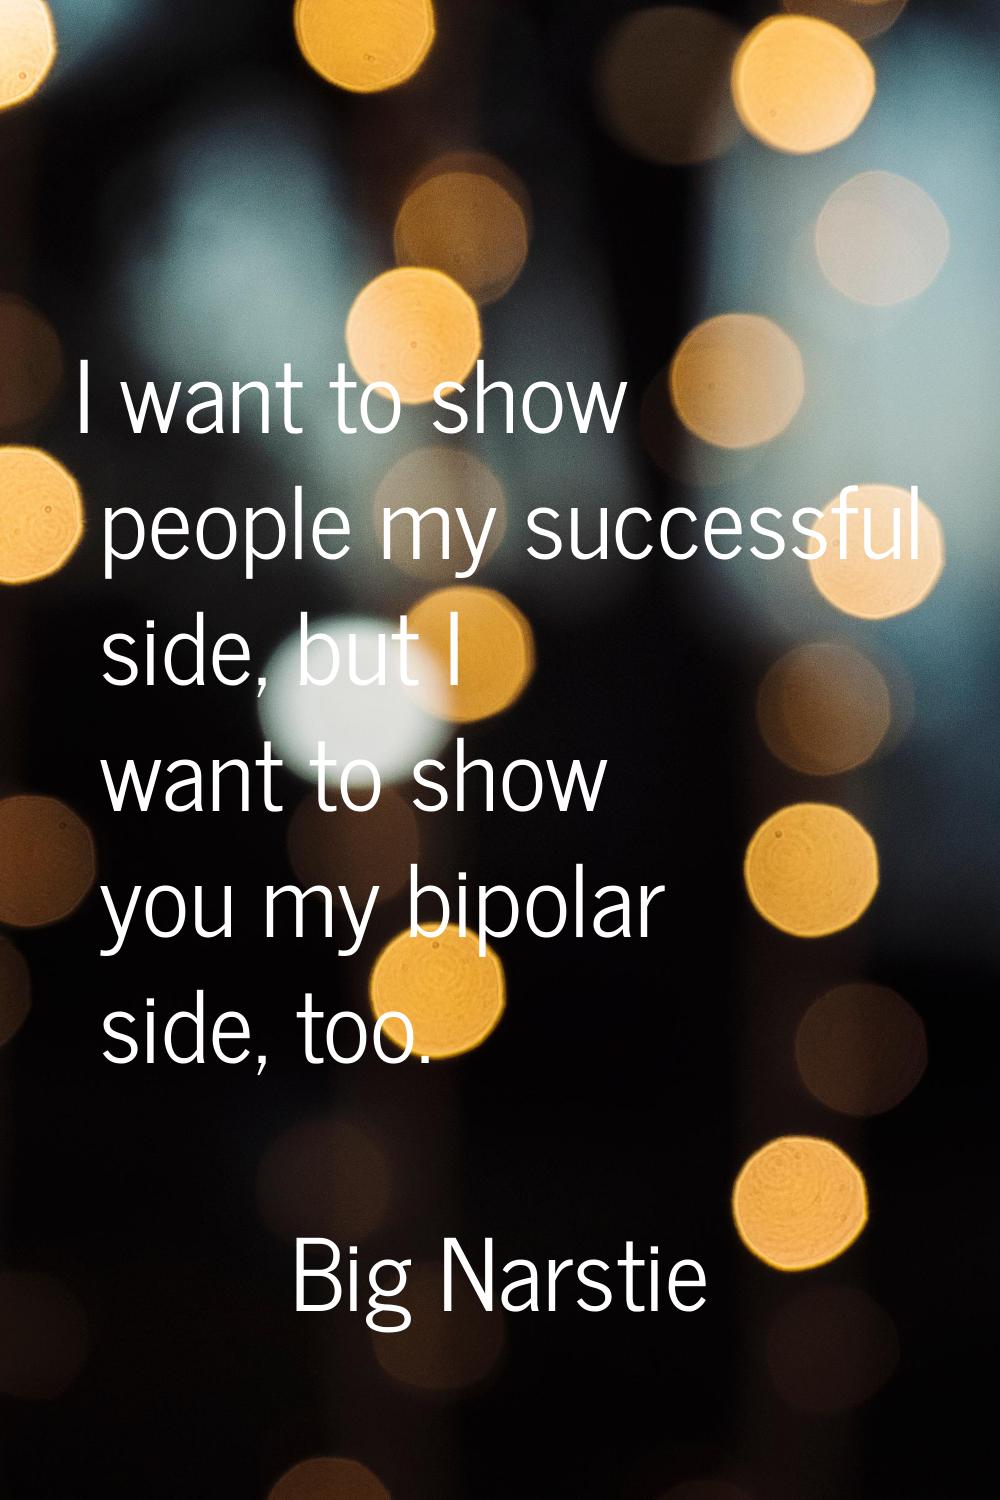 I want to show people my successful side, but I want to show you my bipolar side, too.